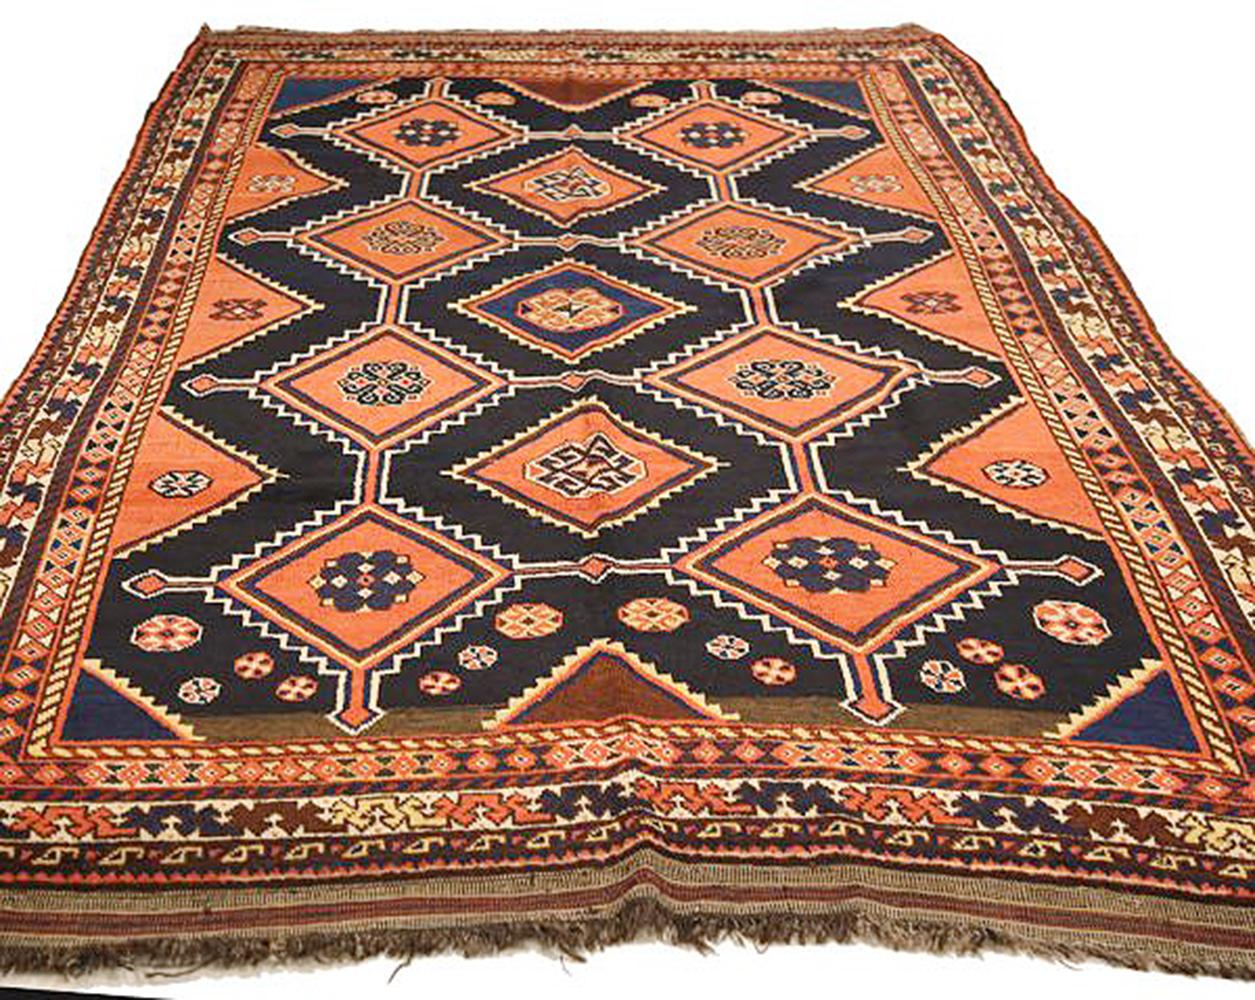 Antique Persian rug handwoven from the finest sheep’s wool and colored with all-natural vegetable dyes that are safe for humans and pets. It’s a traditional Shiraz design featuring blue, orange, and brown floral and geometric details over a black